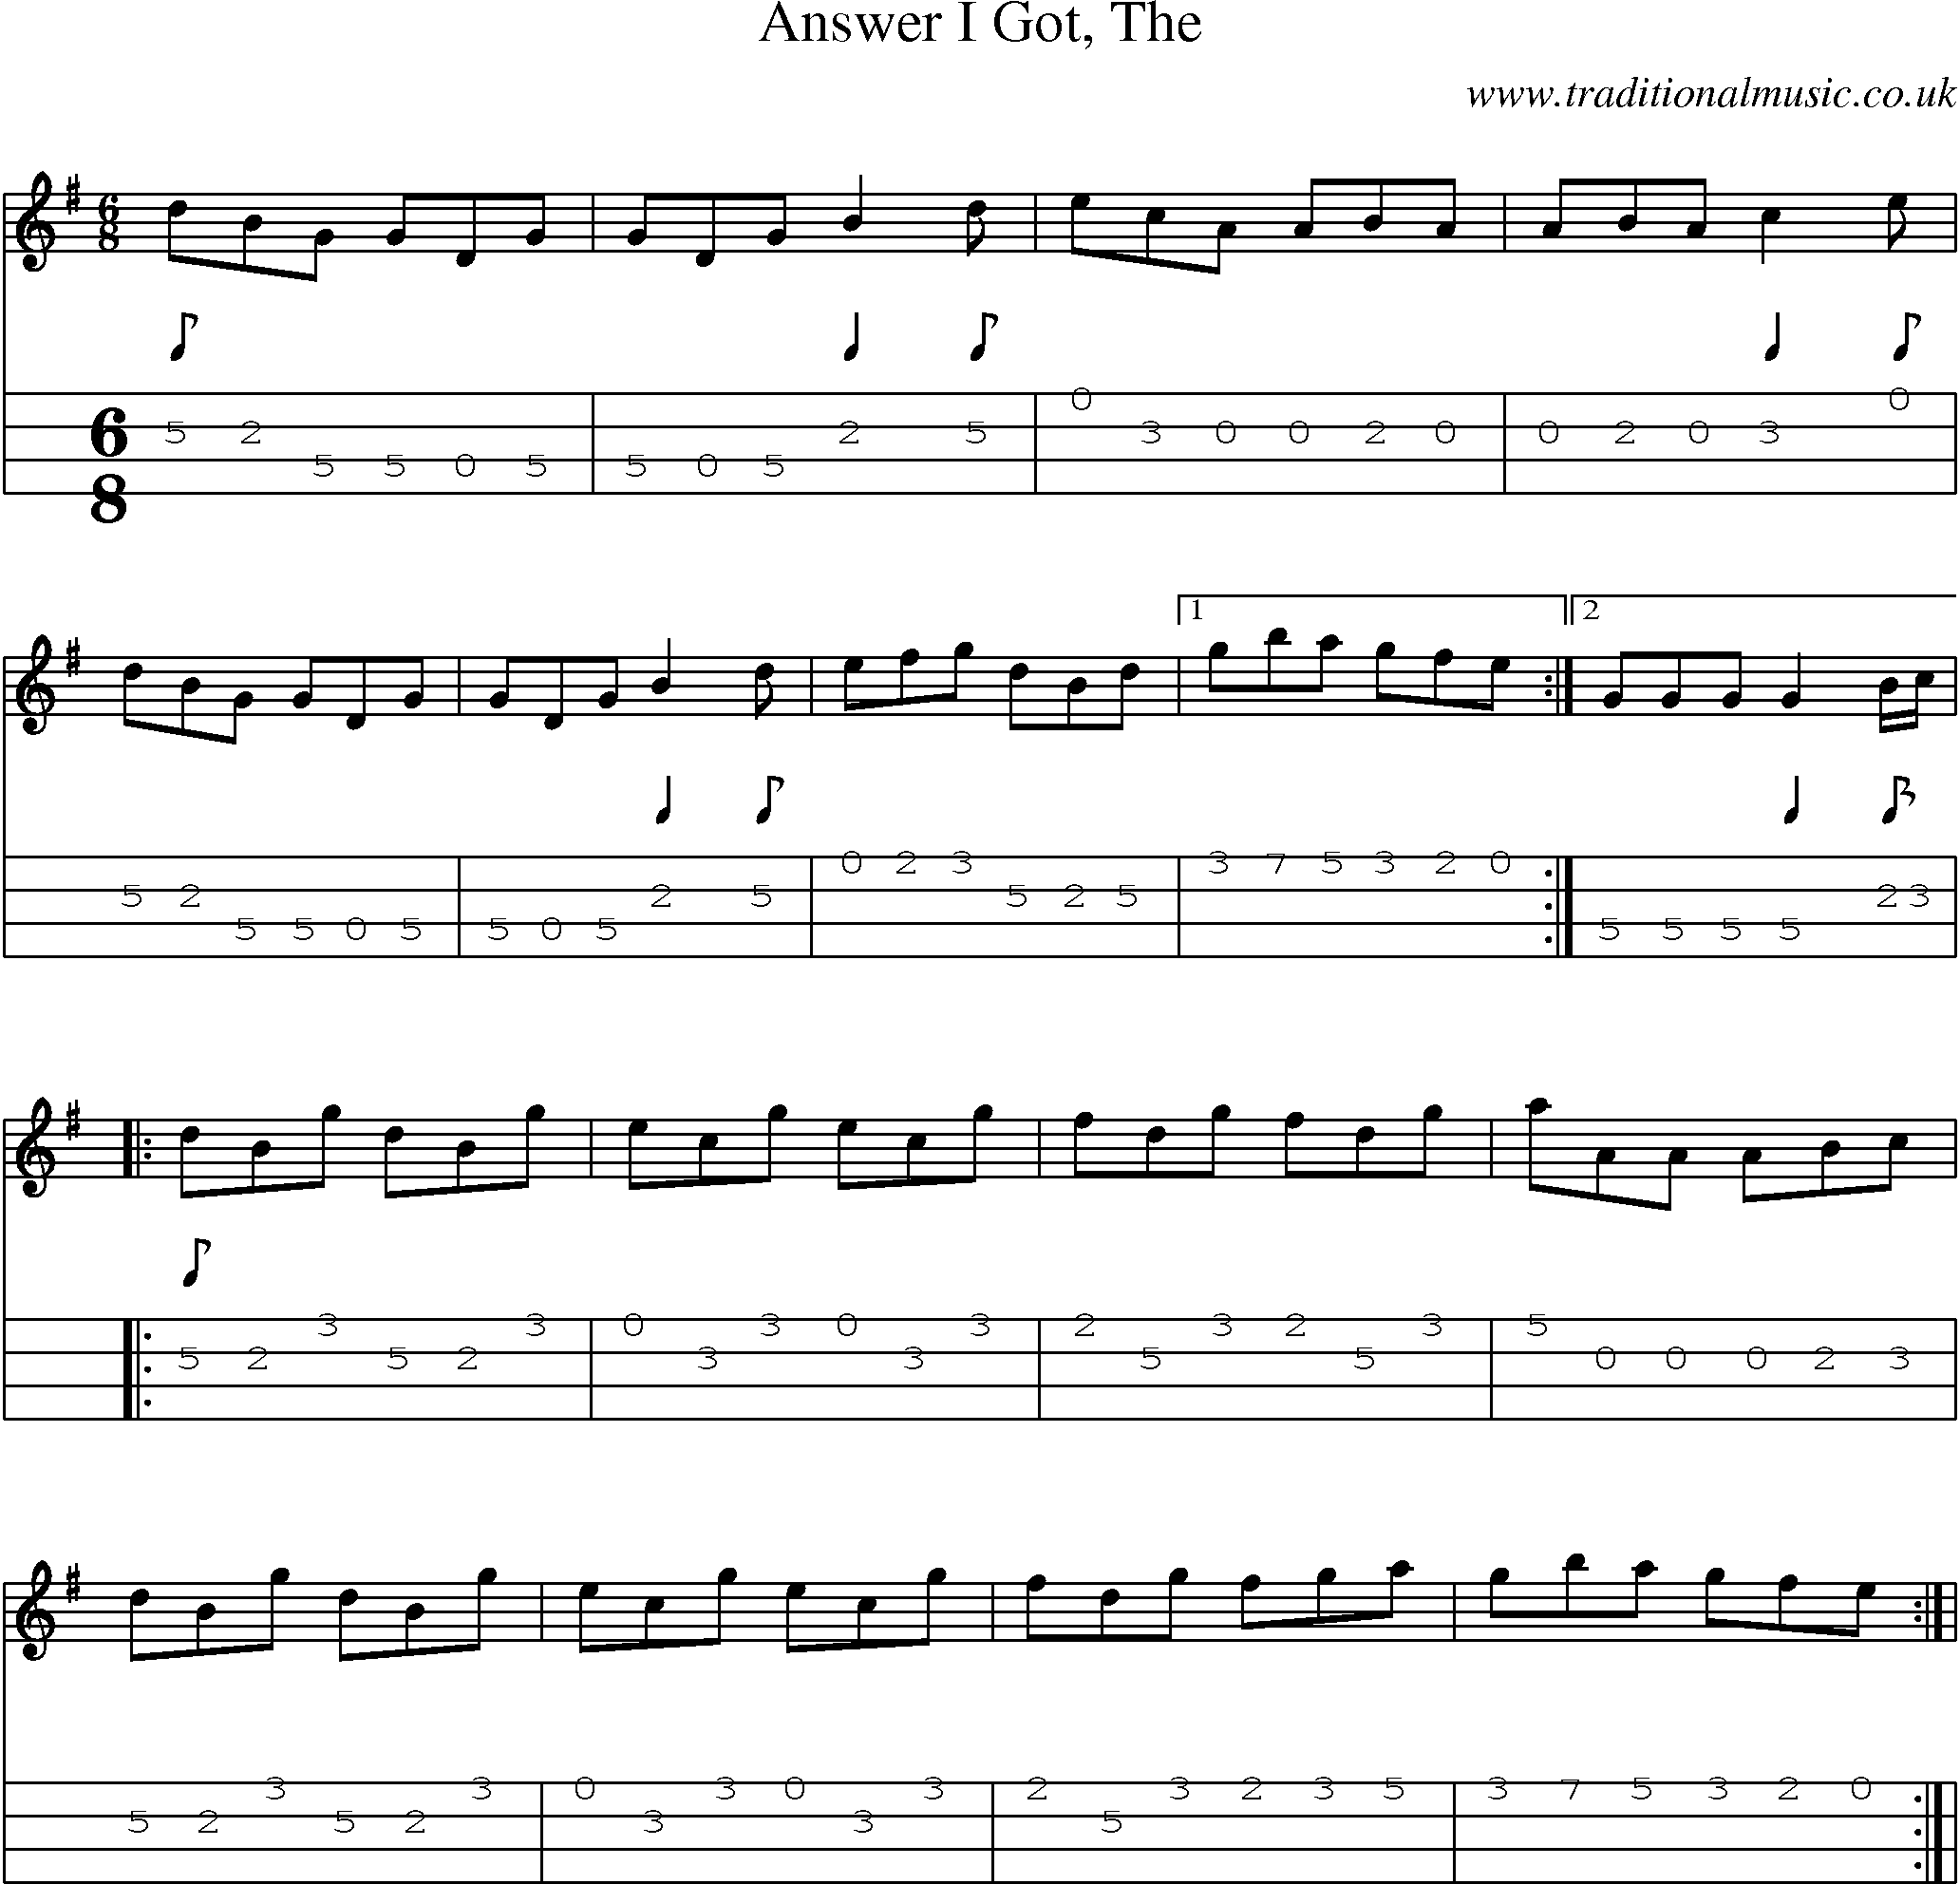 Music Score and Mandolin Tabs for Answer I Got